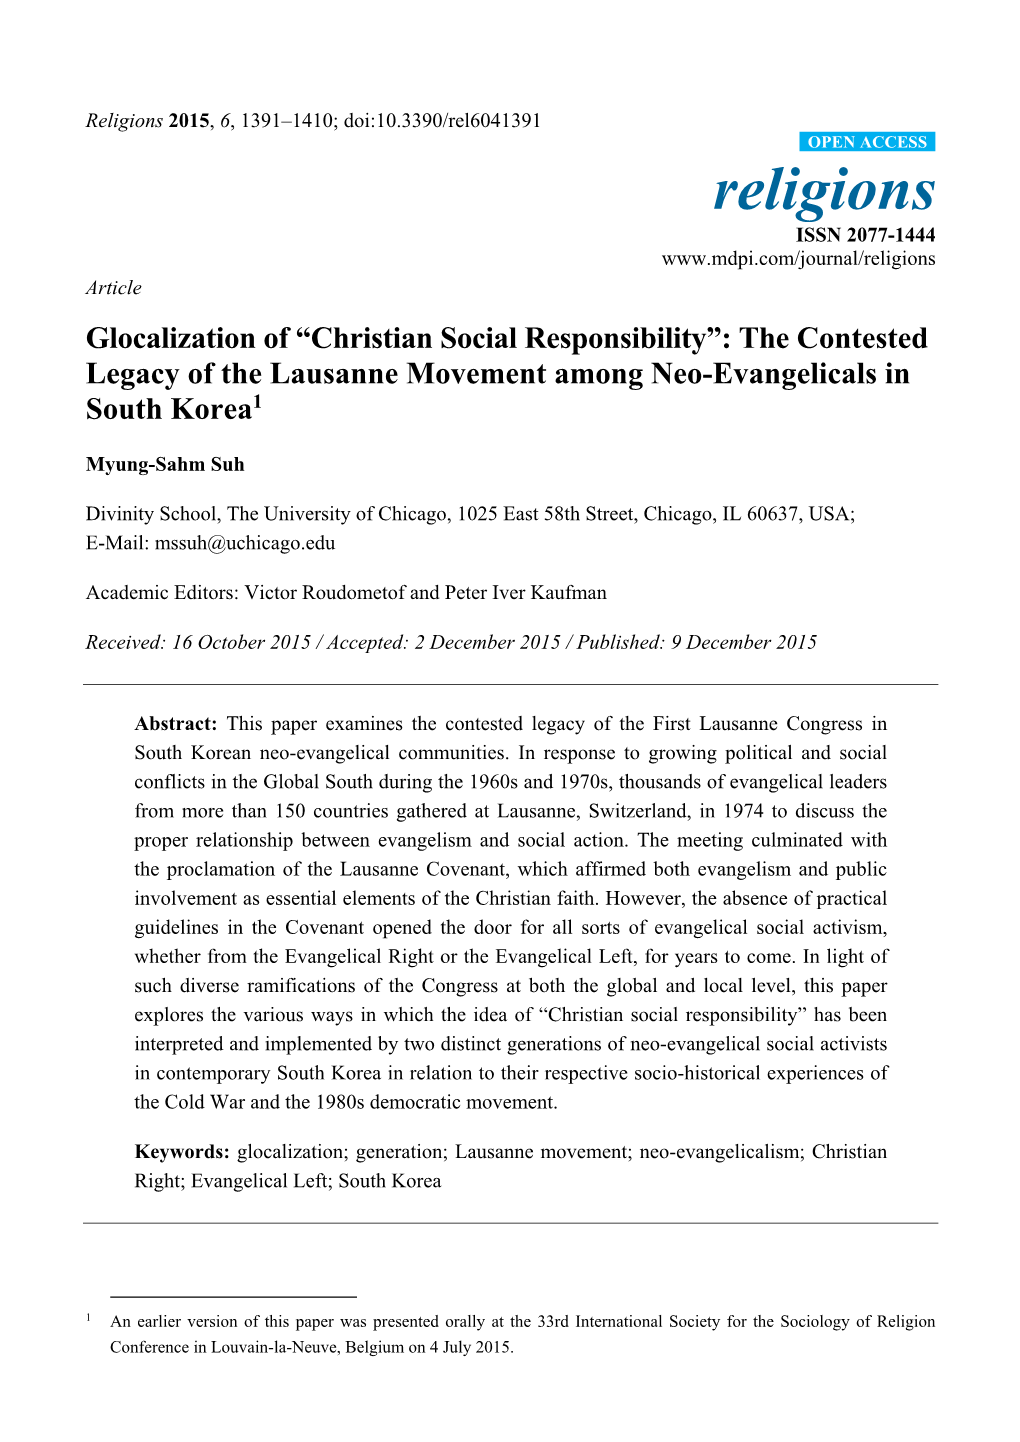 Christian Social Responsibility”: the Contested Legacy of the Lausanne Movement Among Neo-Evangelicals in South Korea1